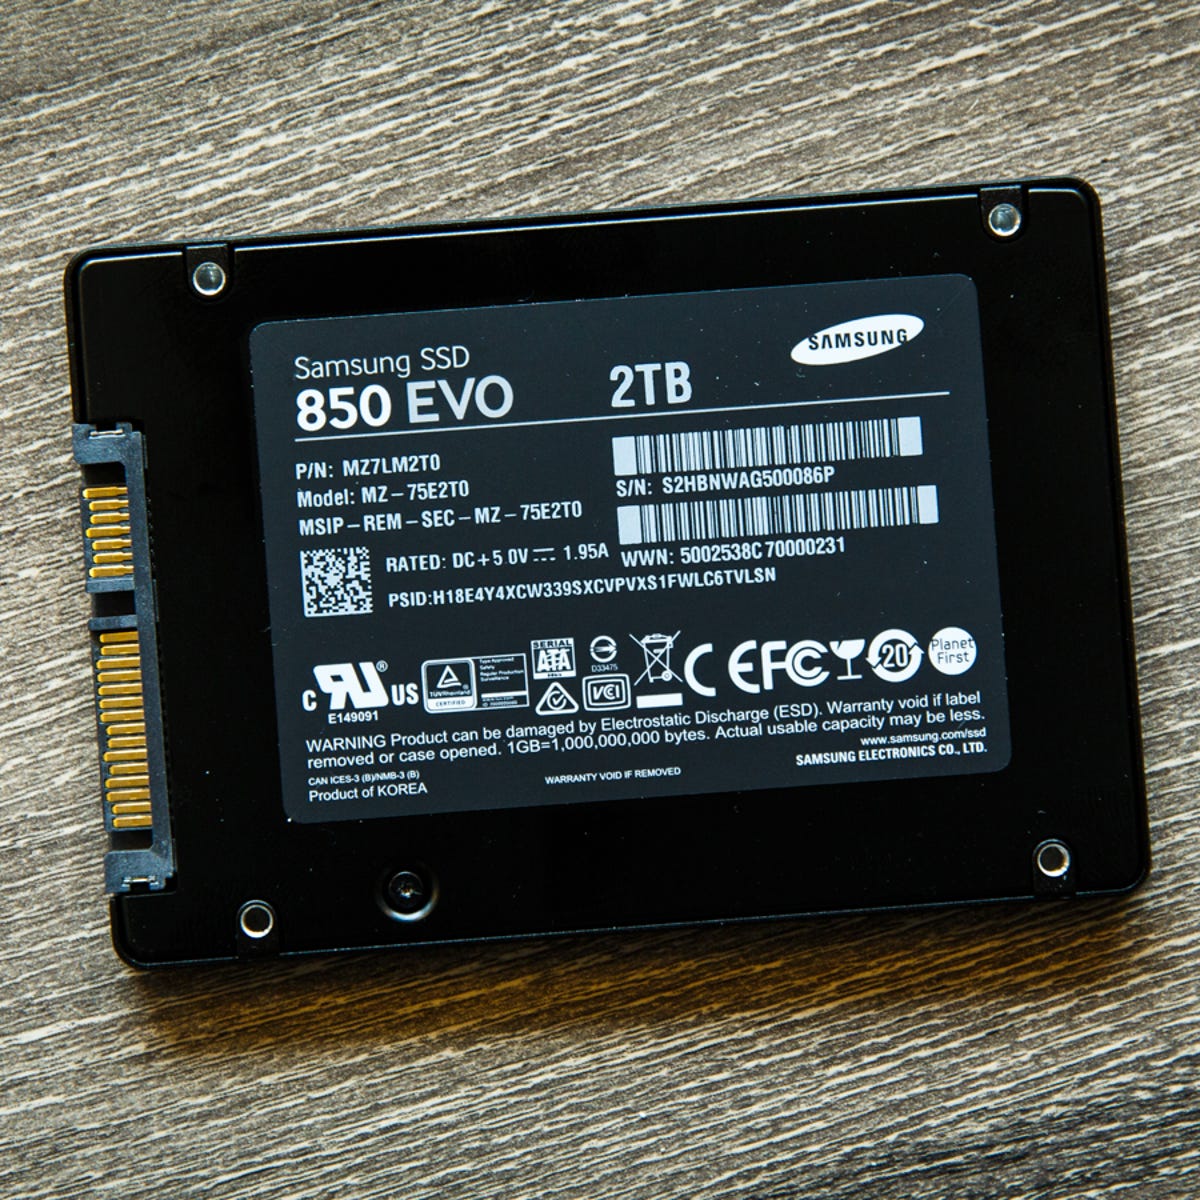 Pence Gymnast Gom Samsung SSD 850 Evo review: Top performance for a low price - CNET